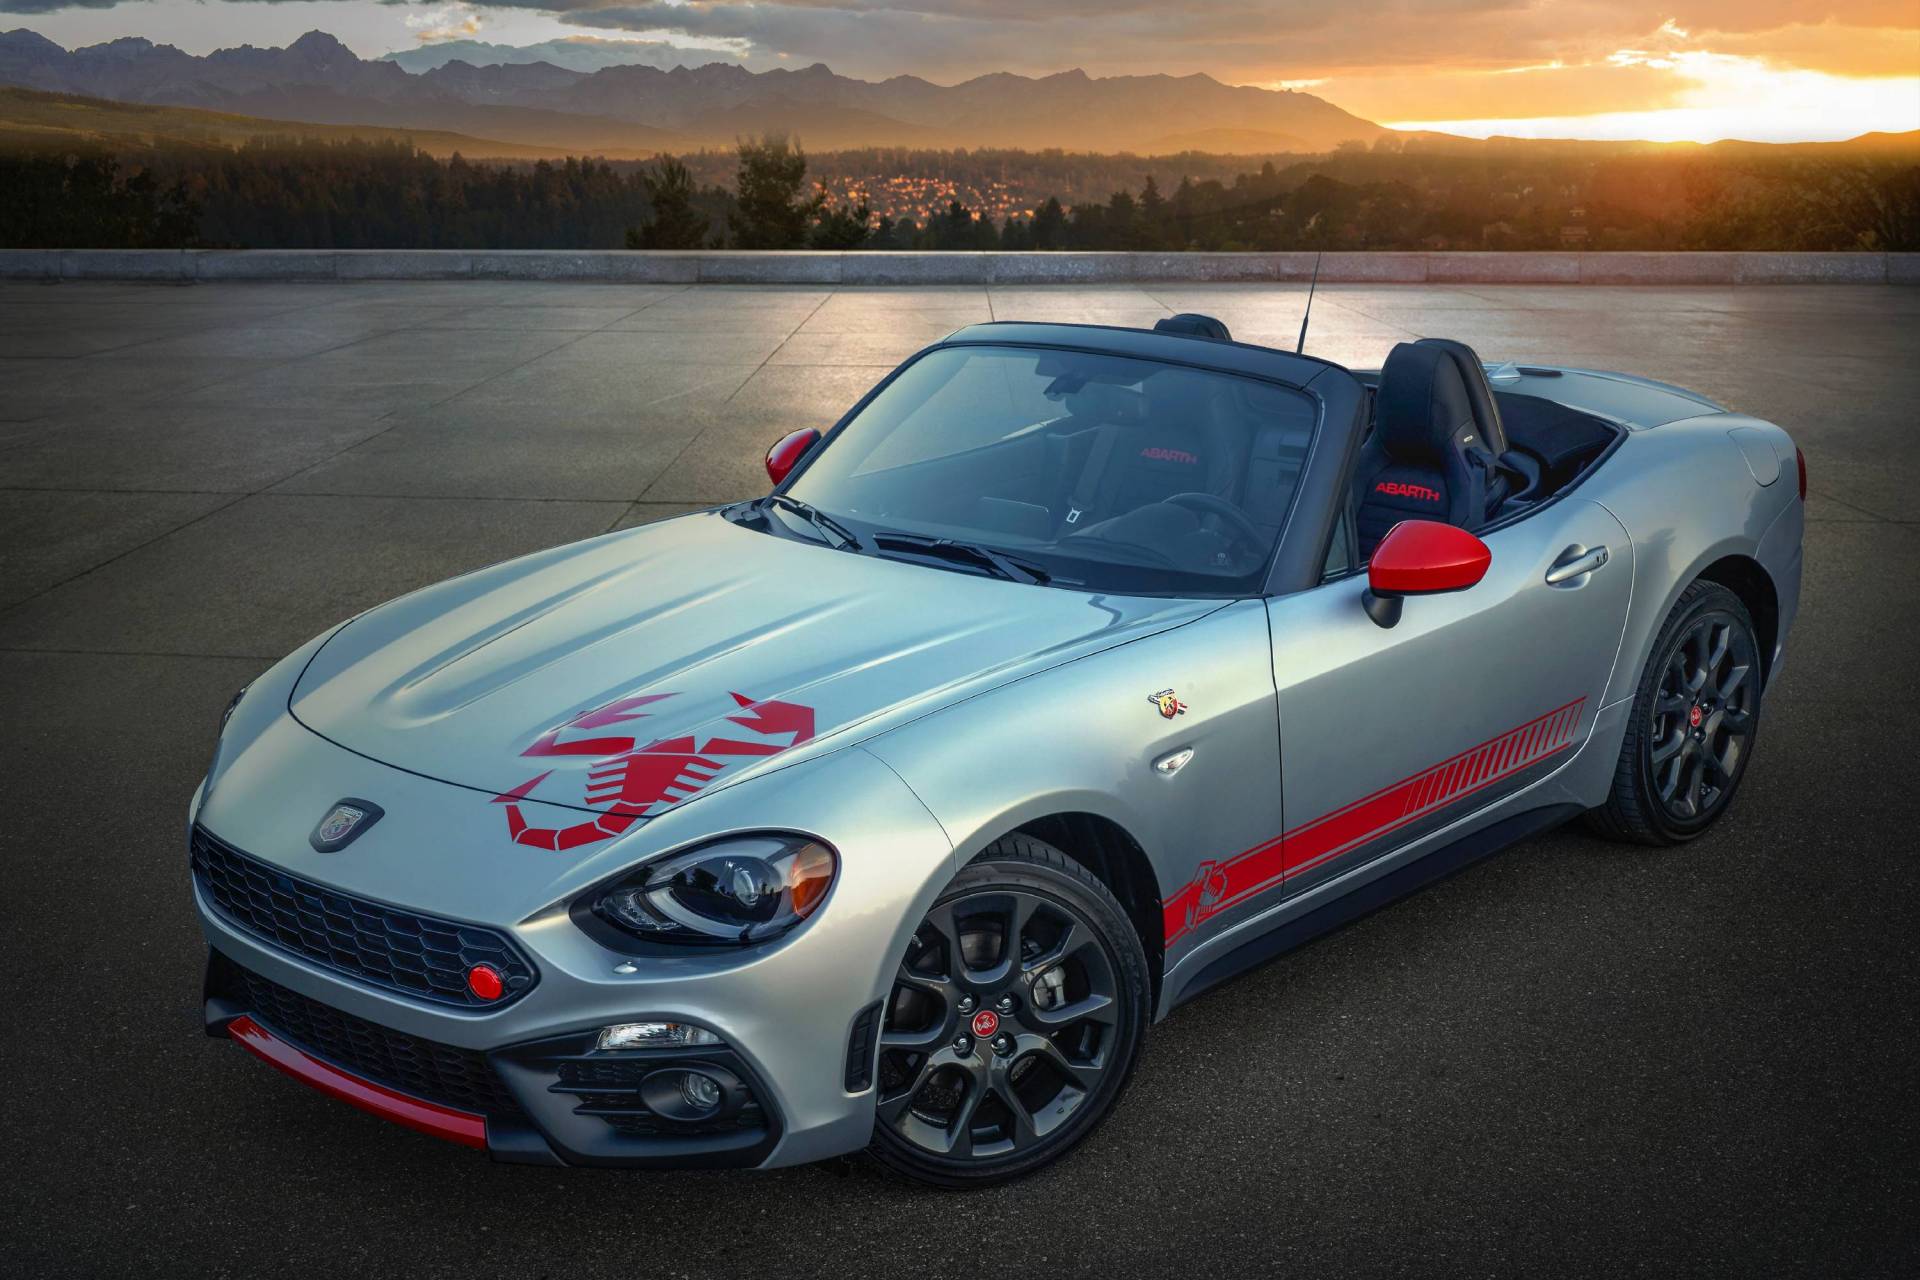 sleuf Uitbeelding hoek 2020 Fiat 124 Spider Updated With Scorpion Decals And… That's About It |  Carscoops